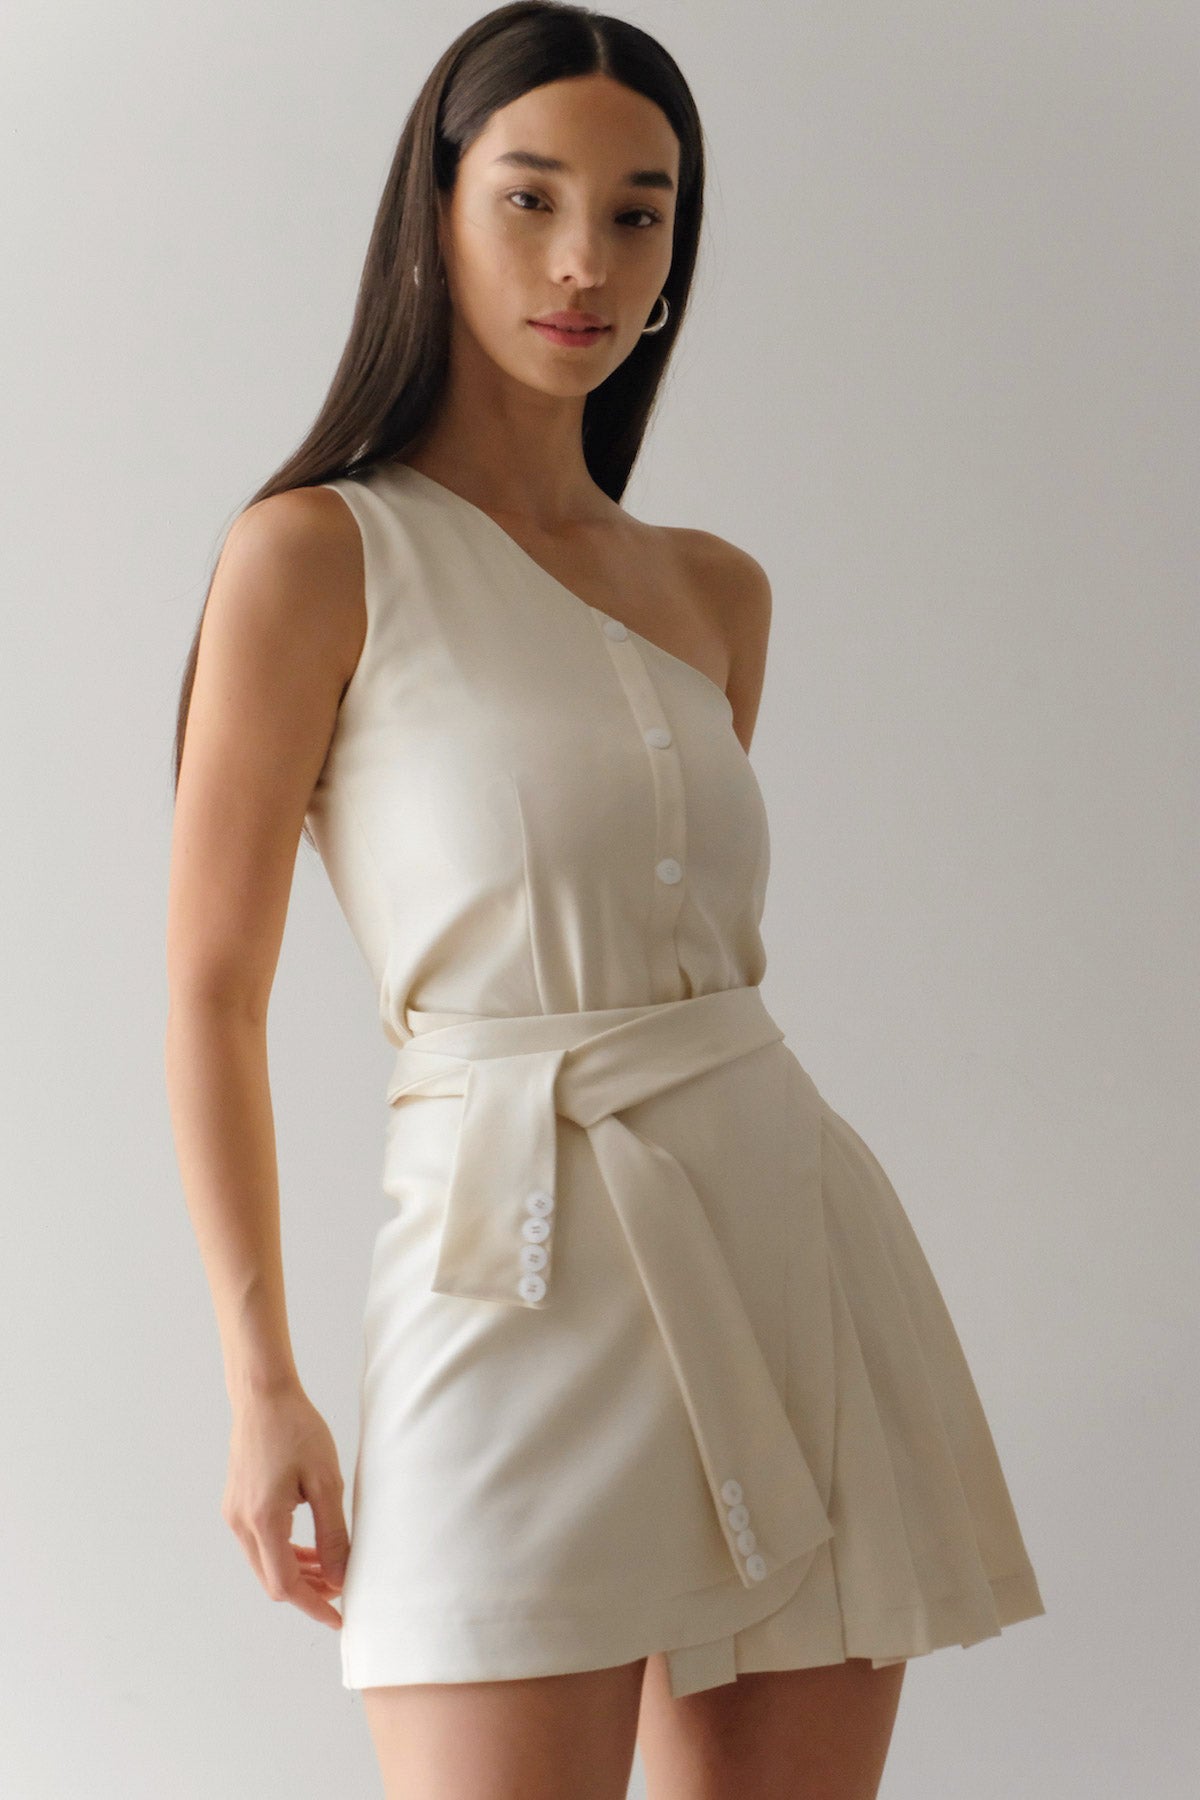 Aguera Skirt In Creme (2 LEFT)